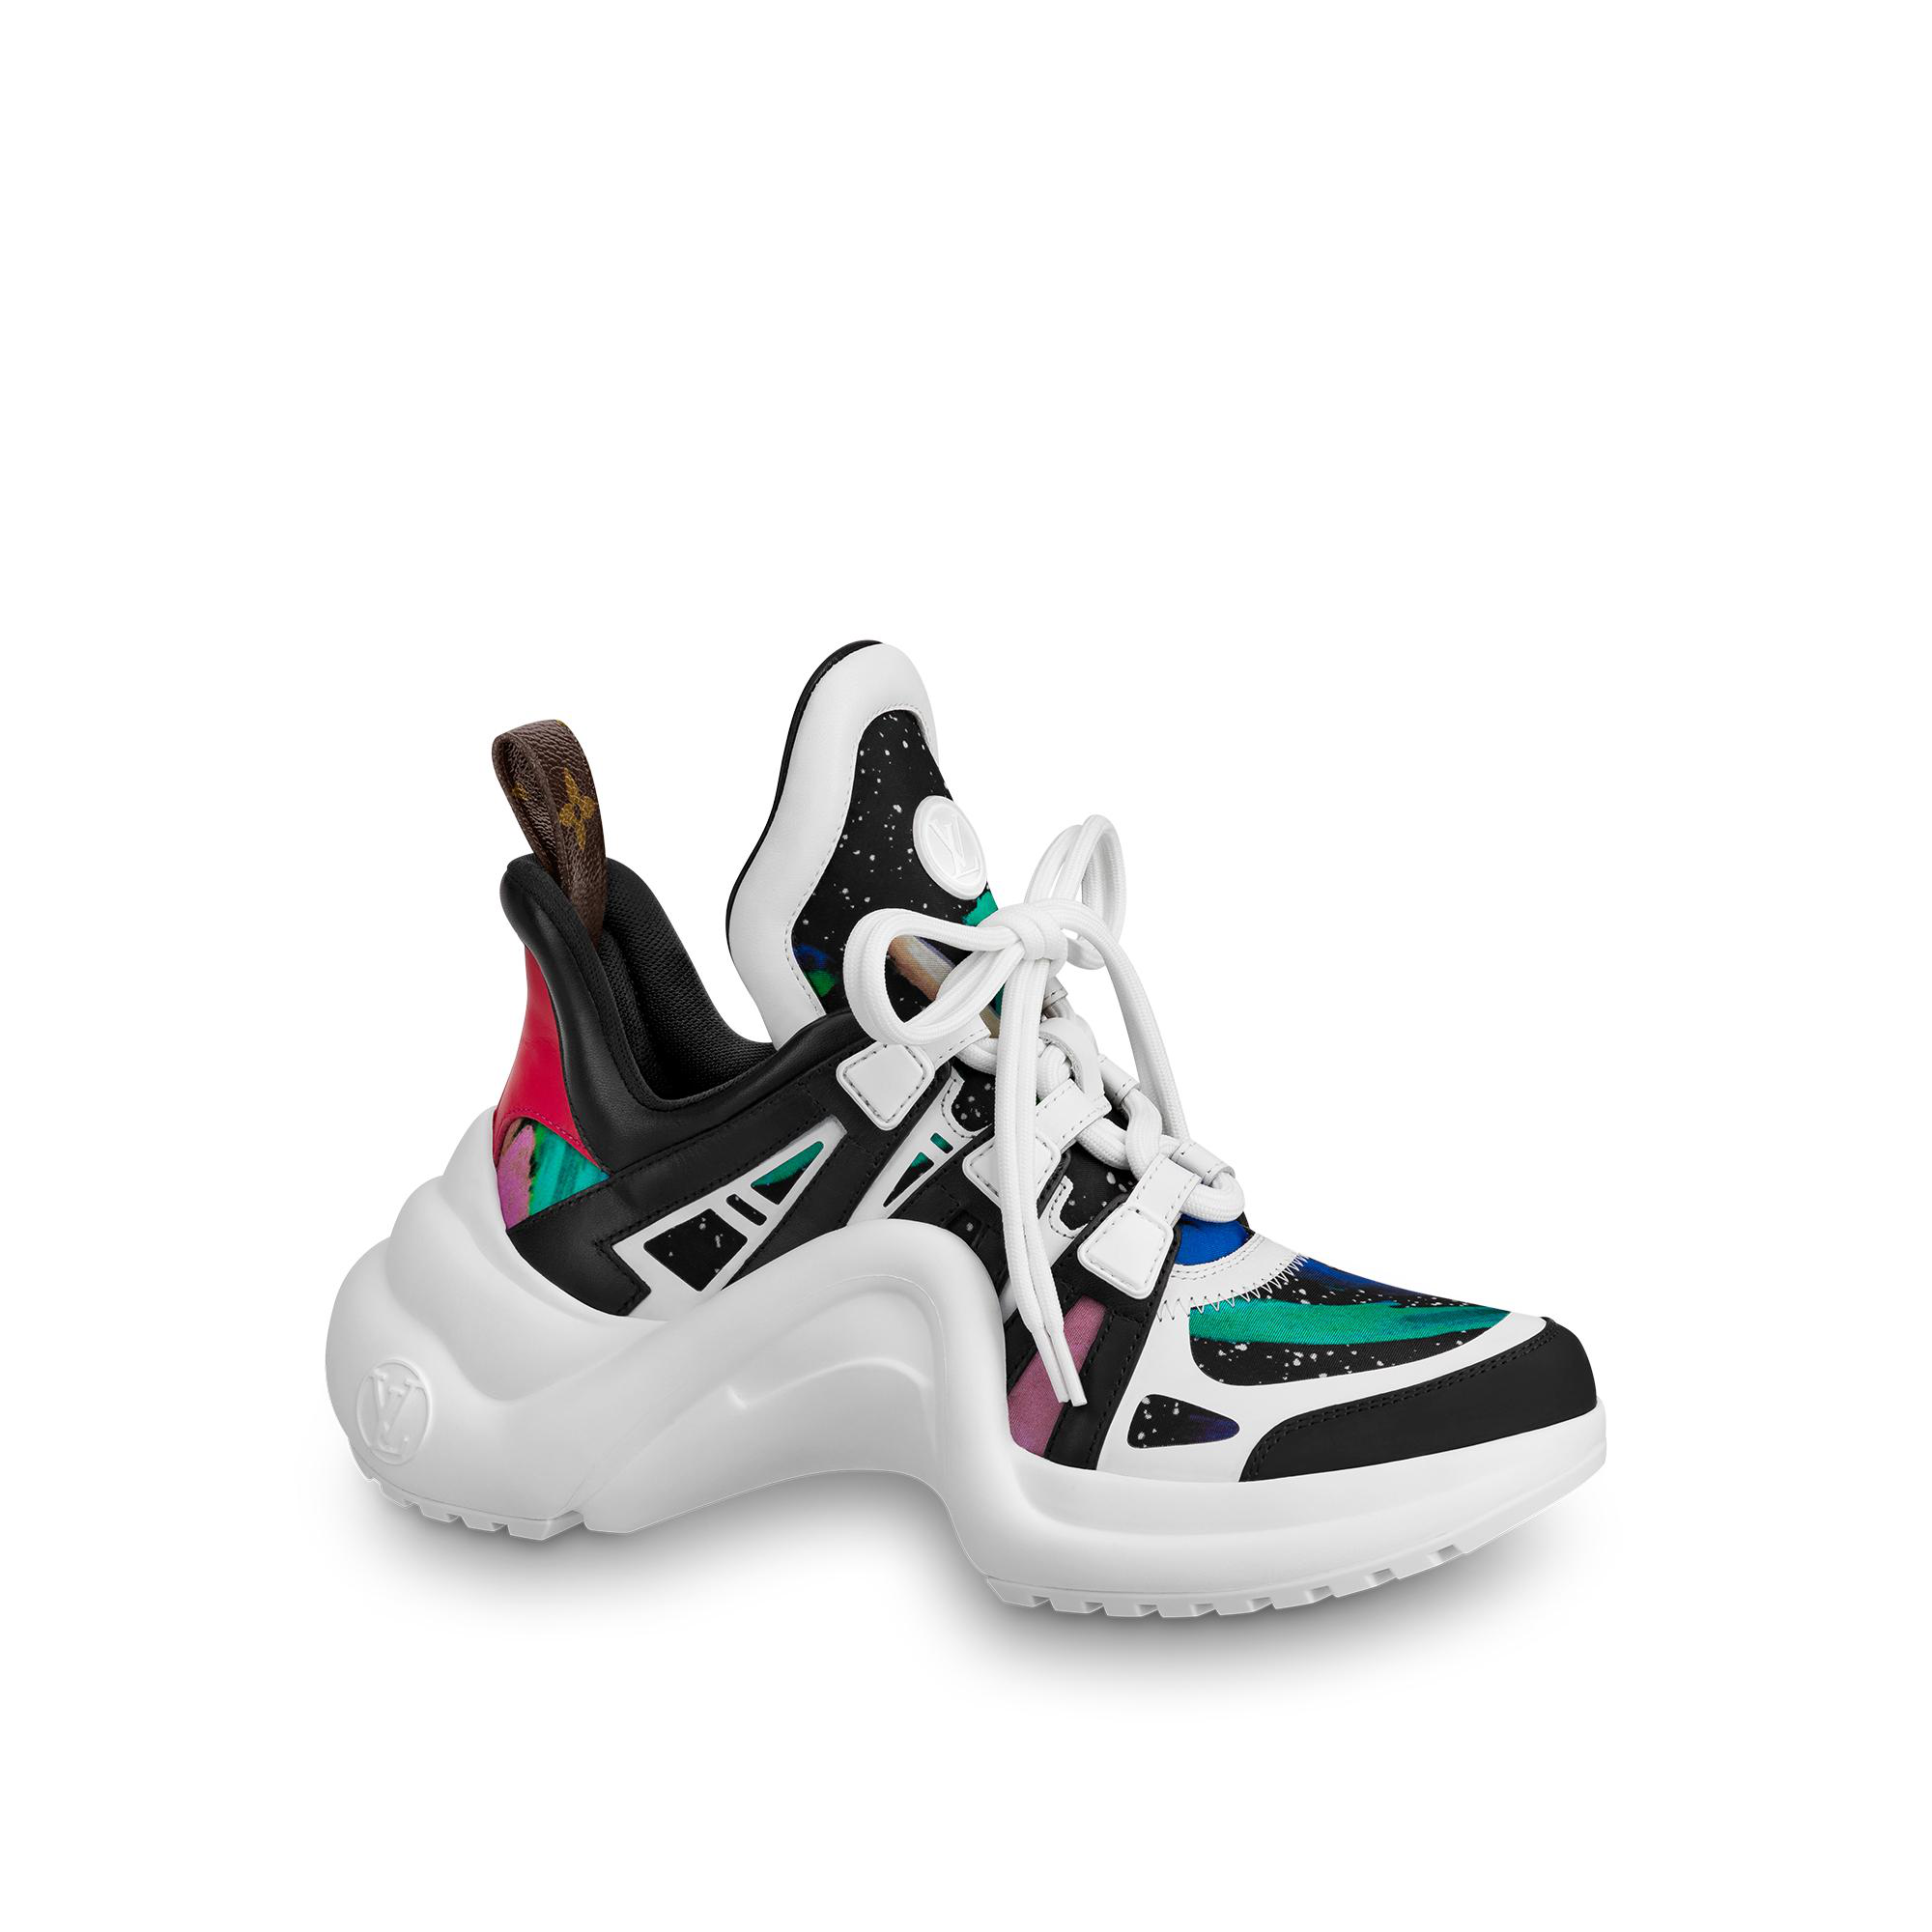 louis vuitton archlight sneakers price